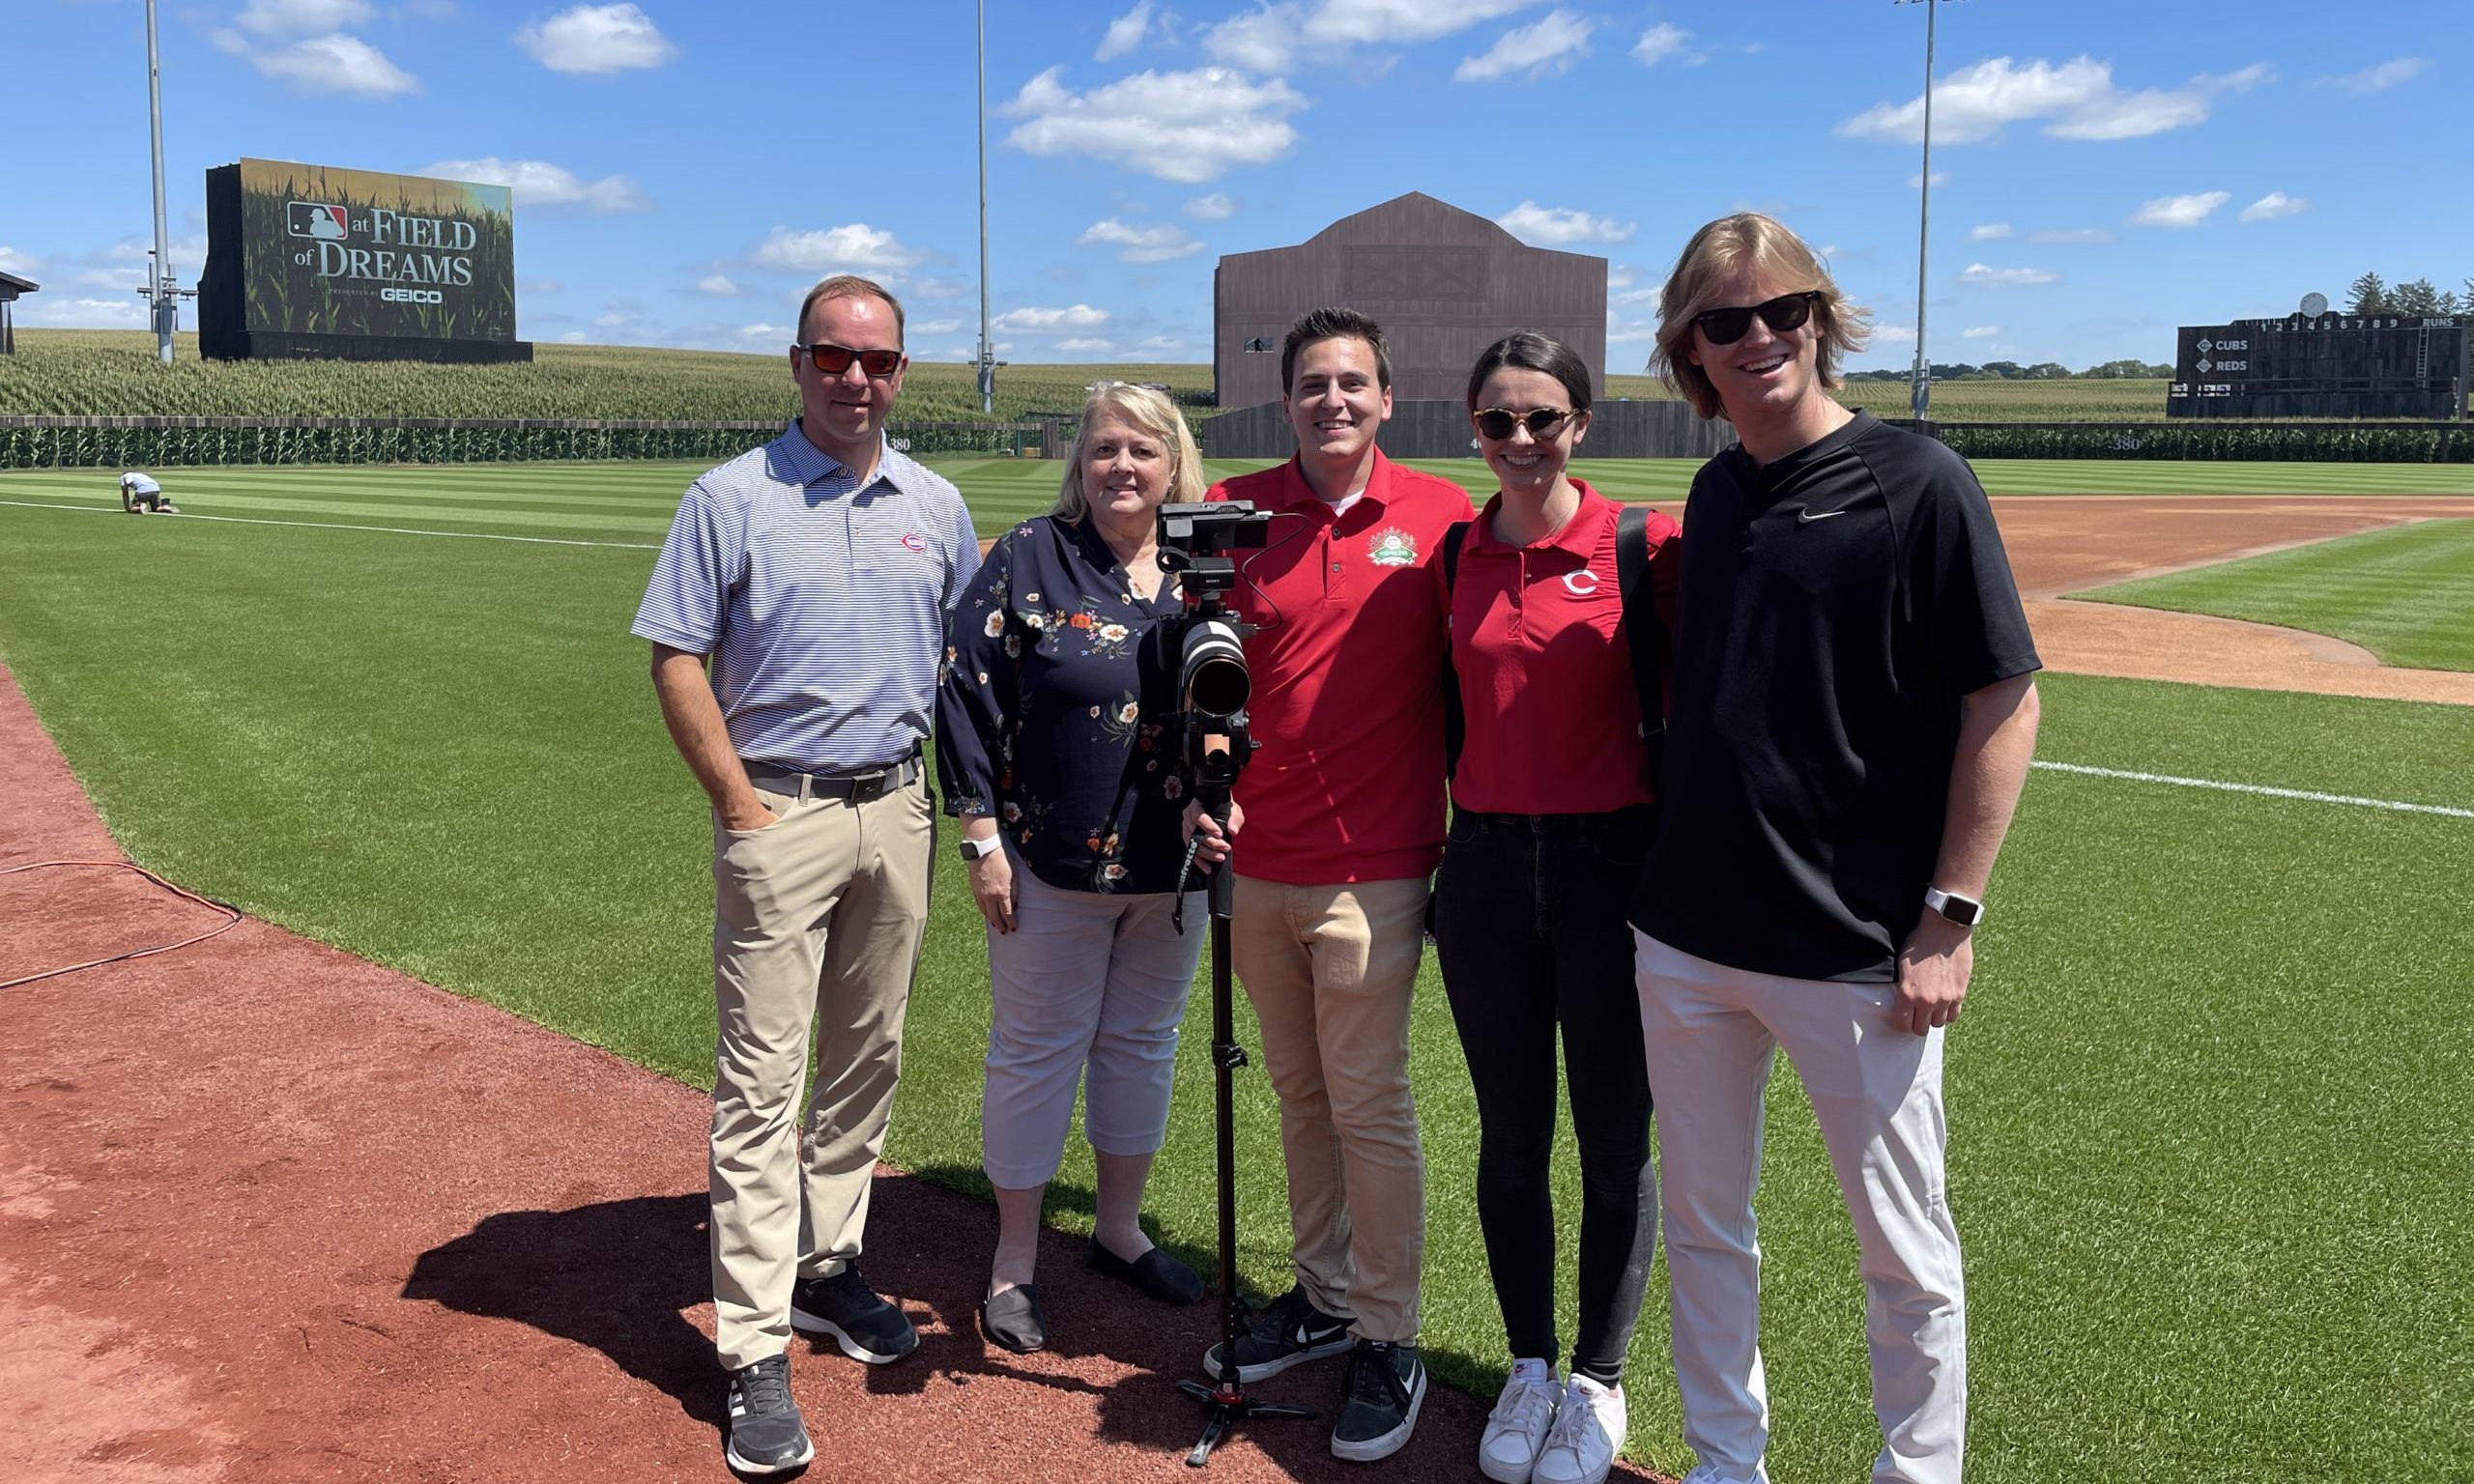 Live From MLB at Field of Dreams: Cincinnati Reds Digital Team Celebrates  One of Baseball's Oldest Franchises